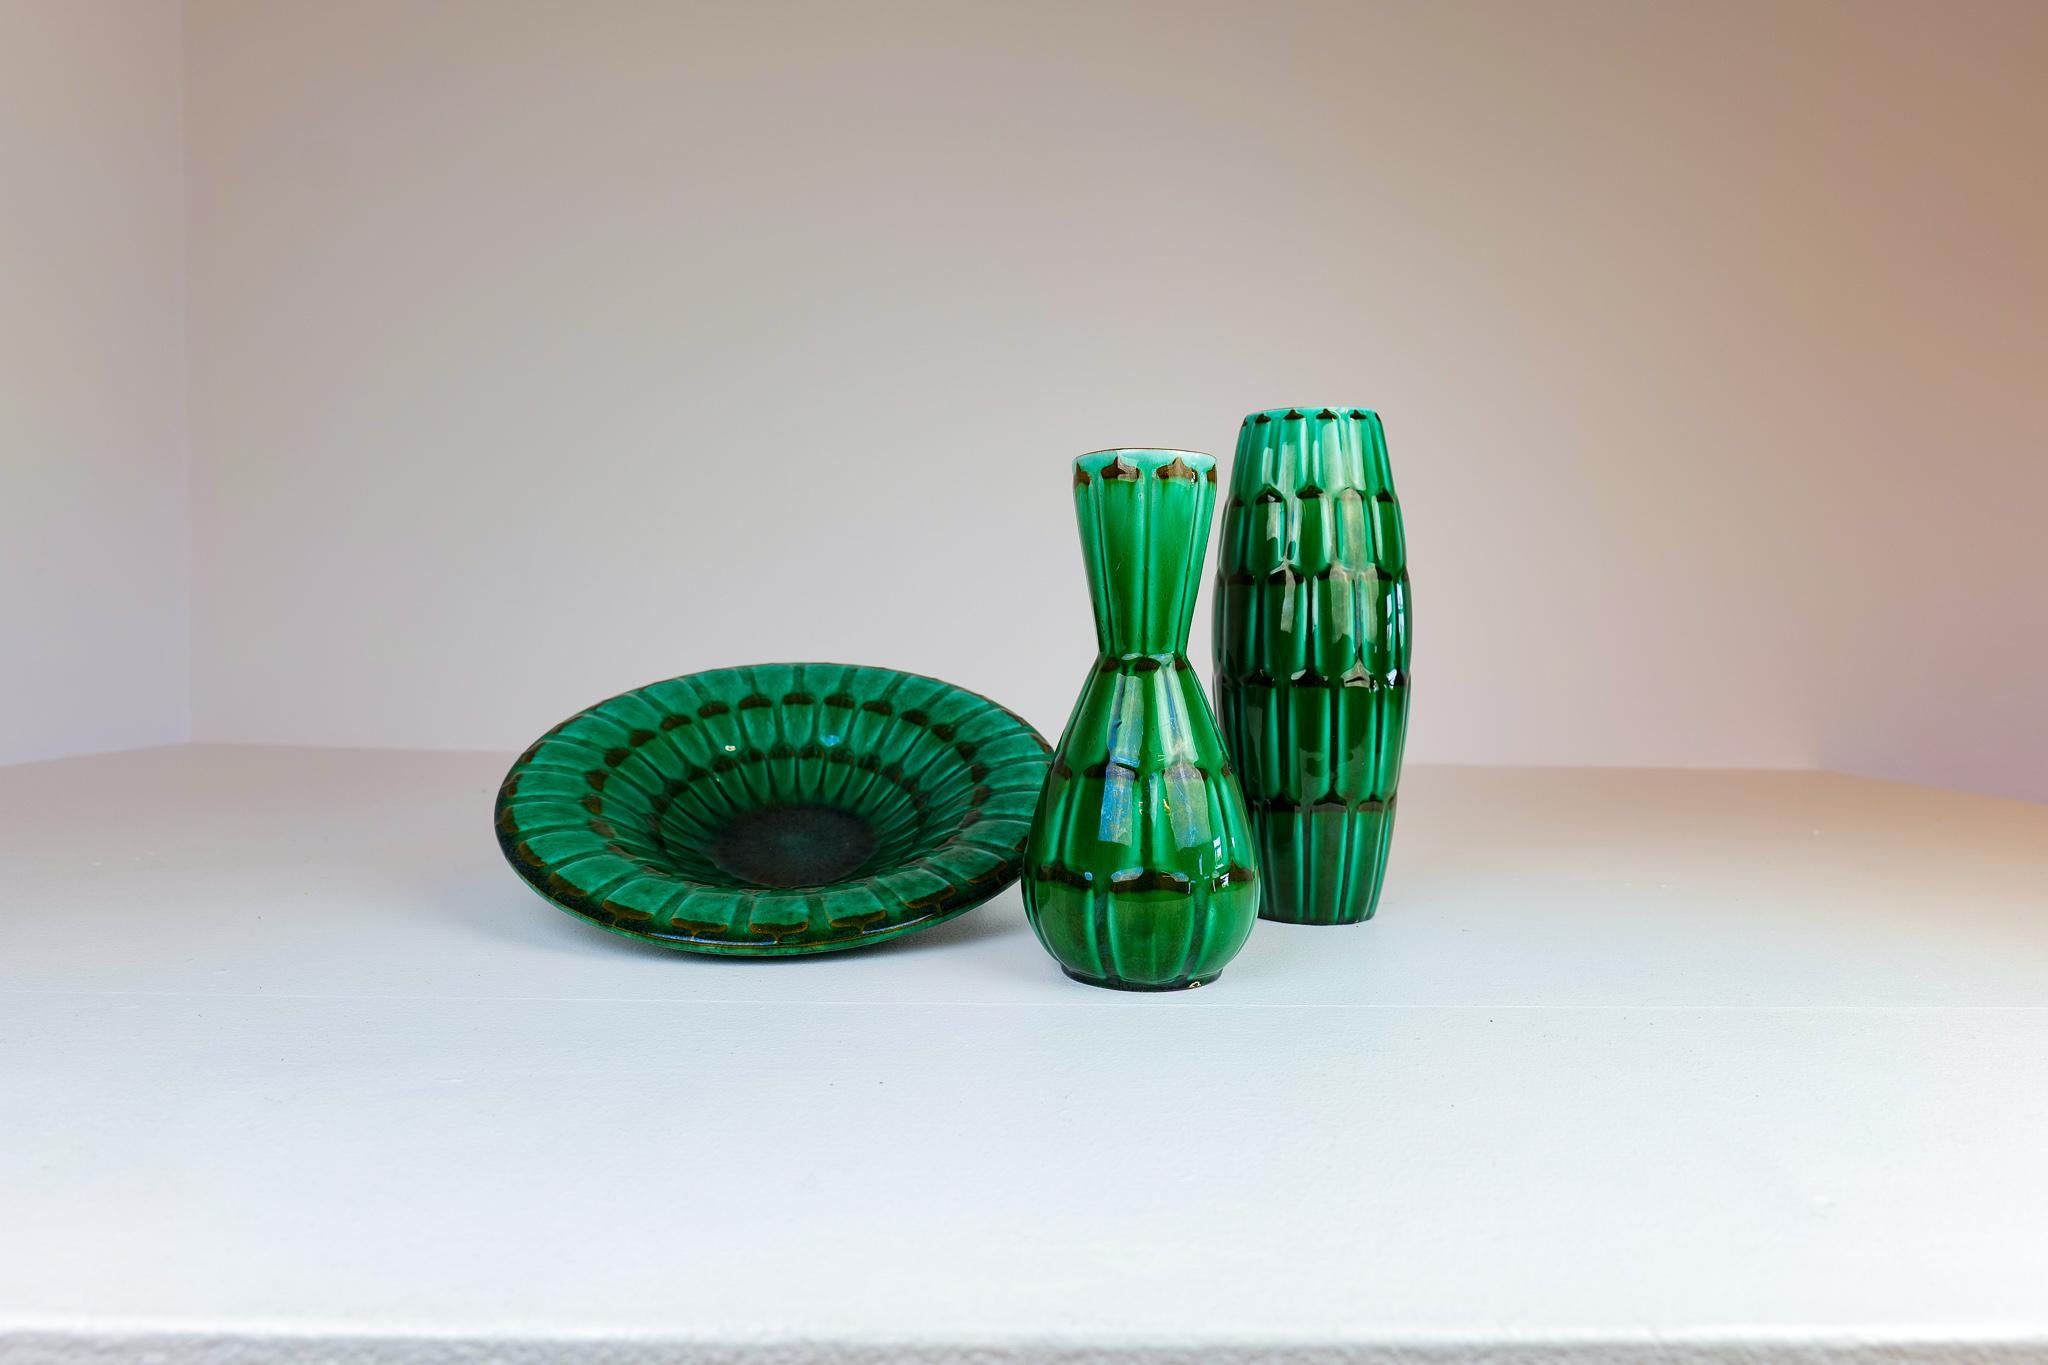 Wonderful midcentury vases and platter produced by Upsala Ekeby Sweden designed by Anna-Lisa Thomson 1951. Wonderful green glace with pattern of artichoke. 

Very good condition. Small traces of wear on the bottom

Measures: Vase H 30 cm, D 17